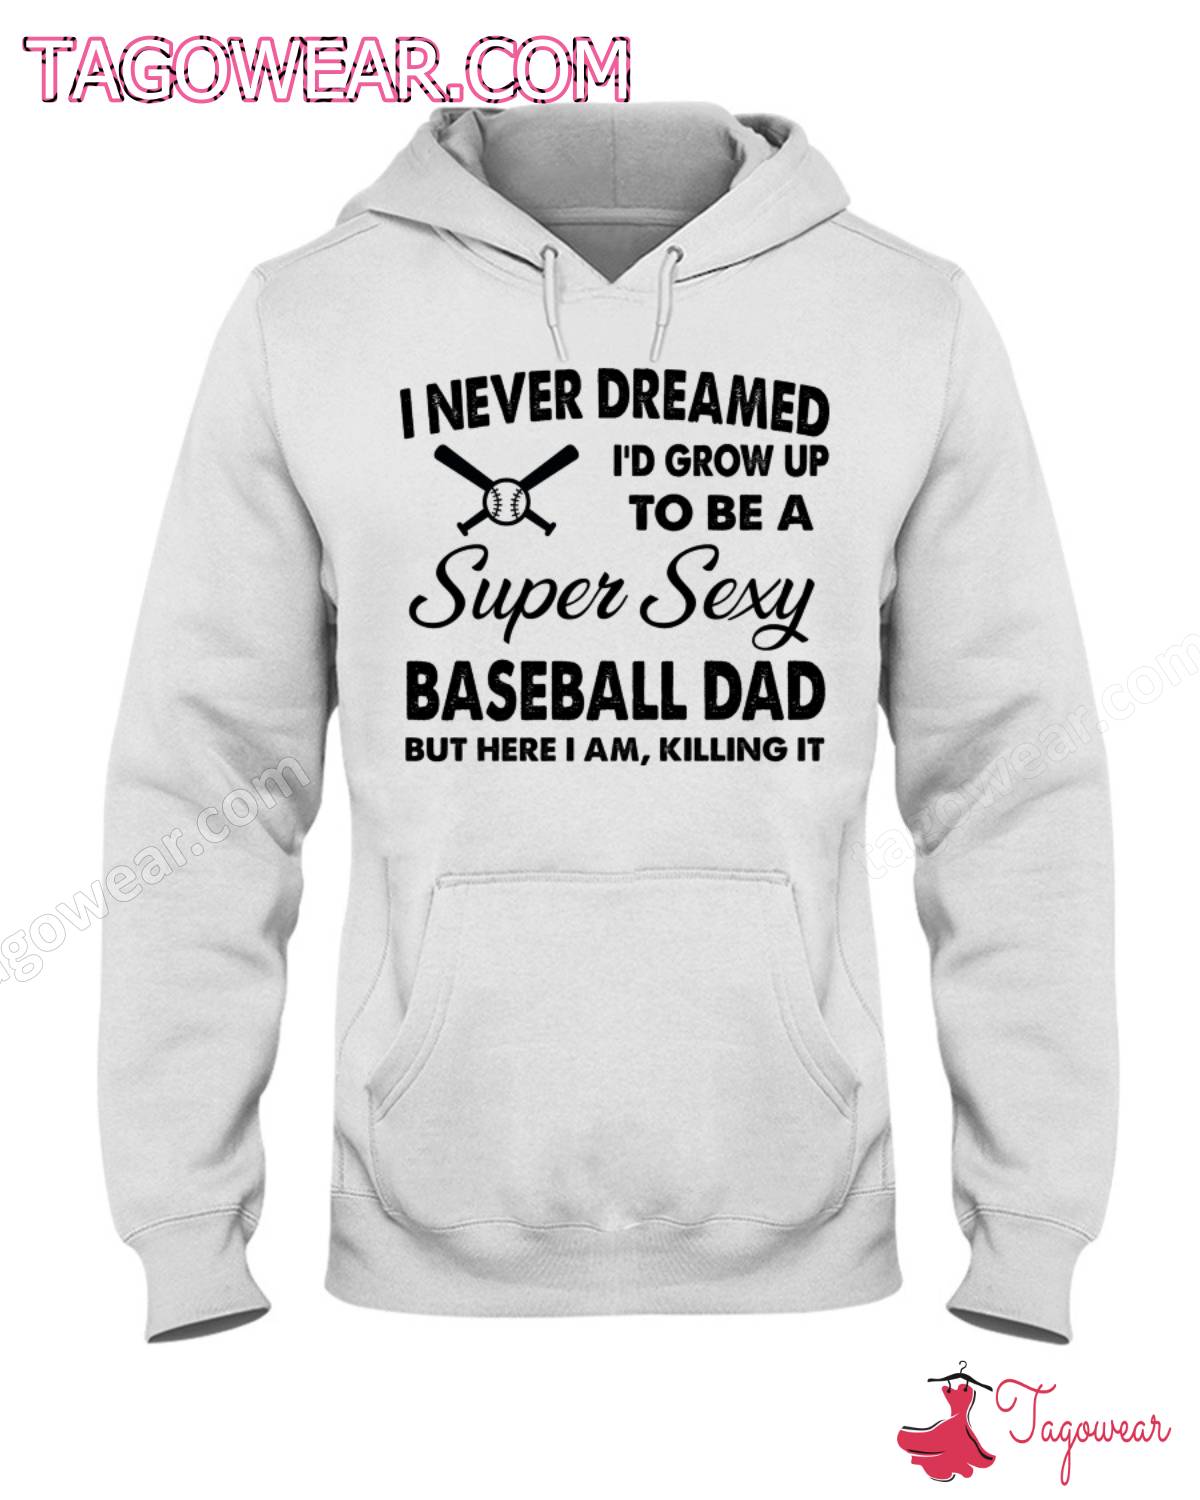 I Never Dreamed I'd Grow Up To Be A Super Sexy Baseball Dad But Here I Am Killing It Shirt a